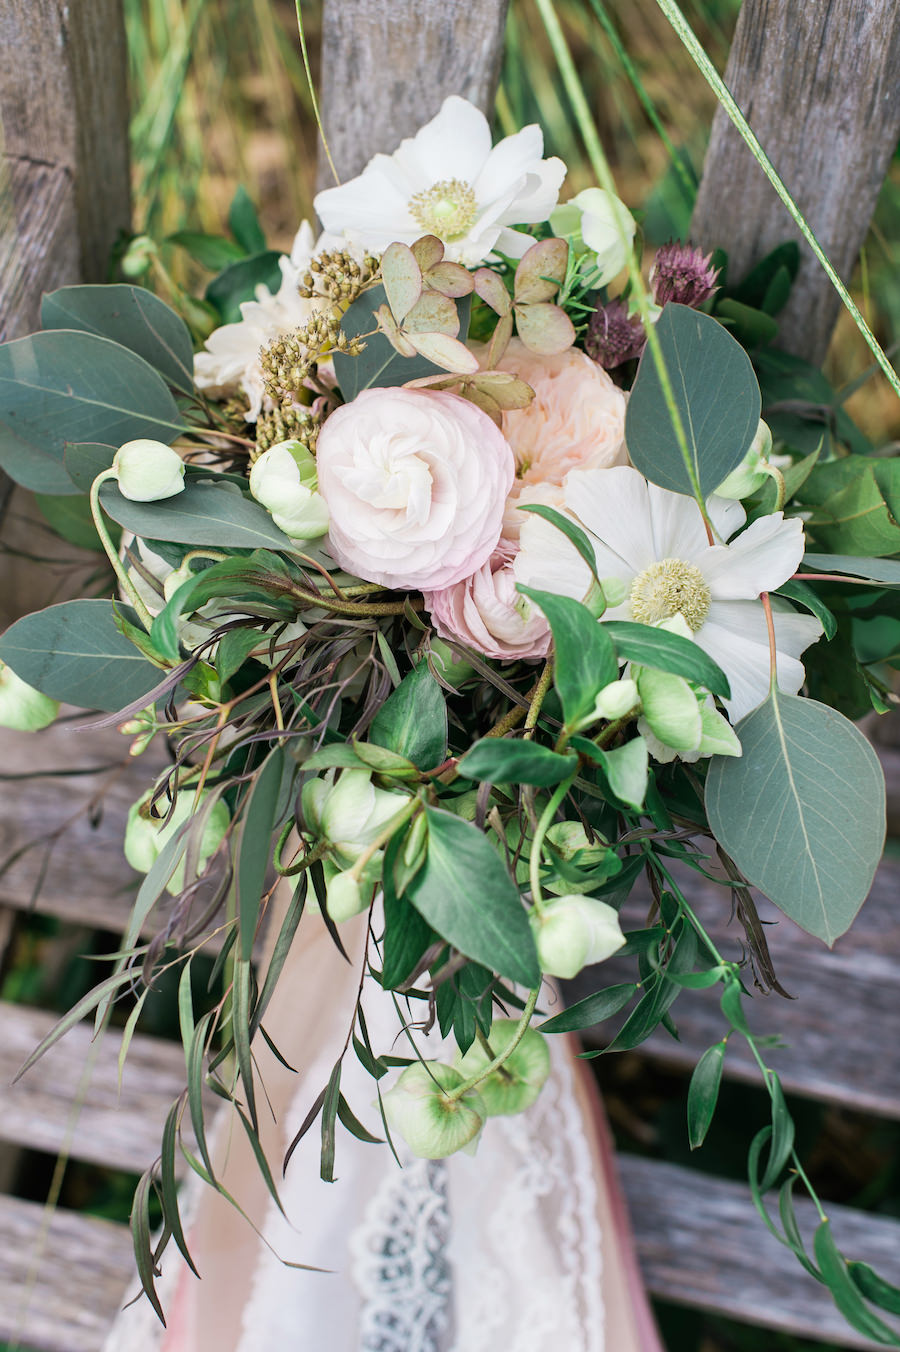 Rustic Bridal Wedding Bouquet with Blush and Ivory Ranunculus and Greenery | Sarasota Wedding Florist Andrea Layne Floral Design